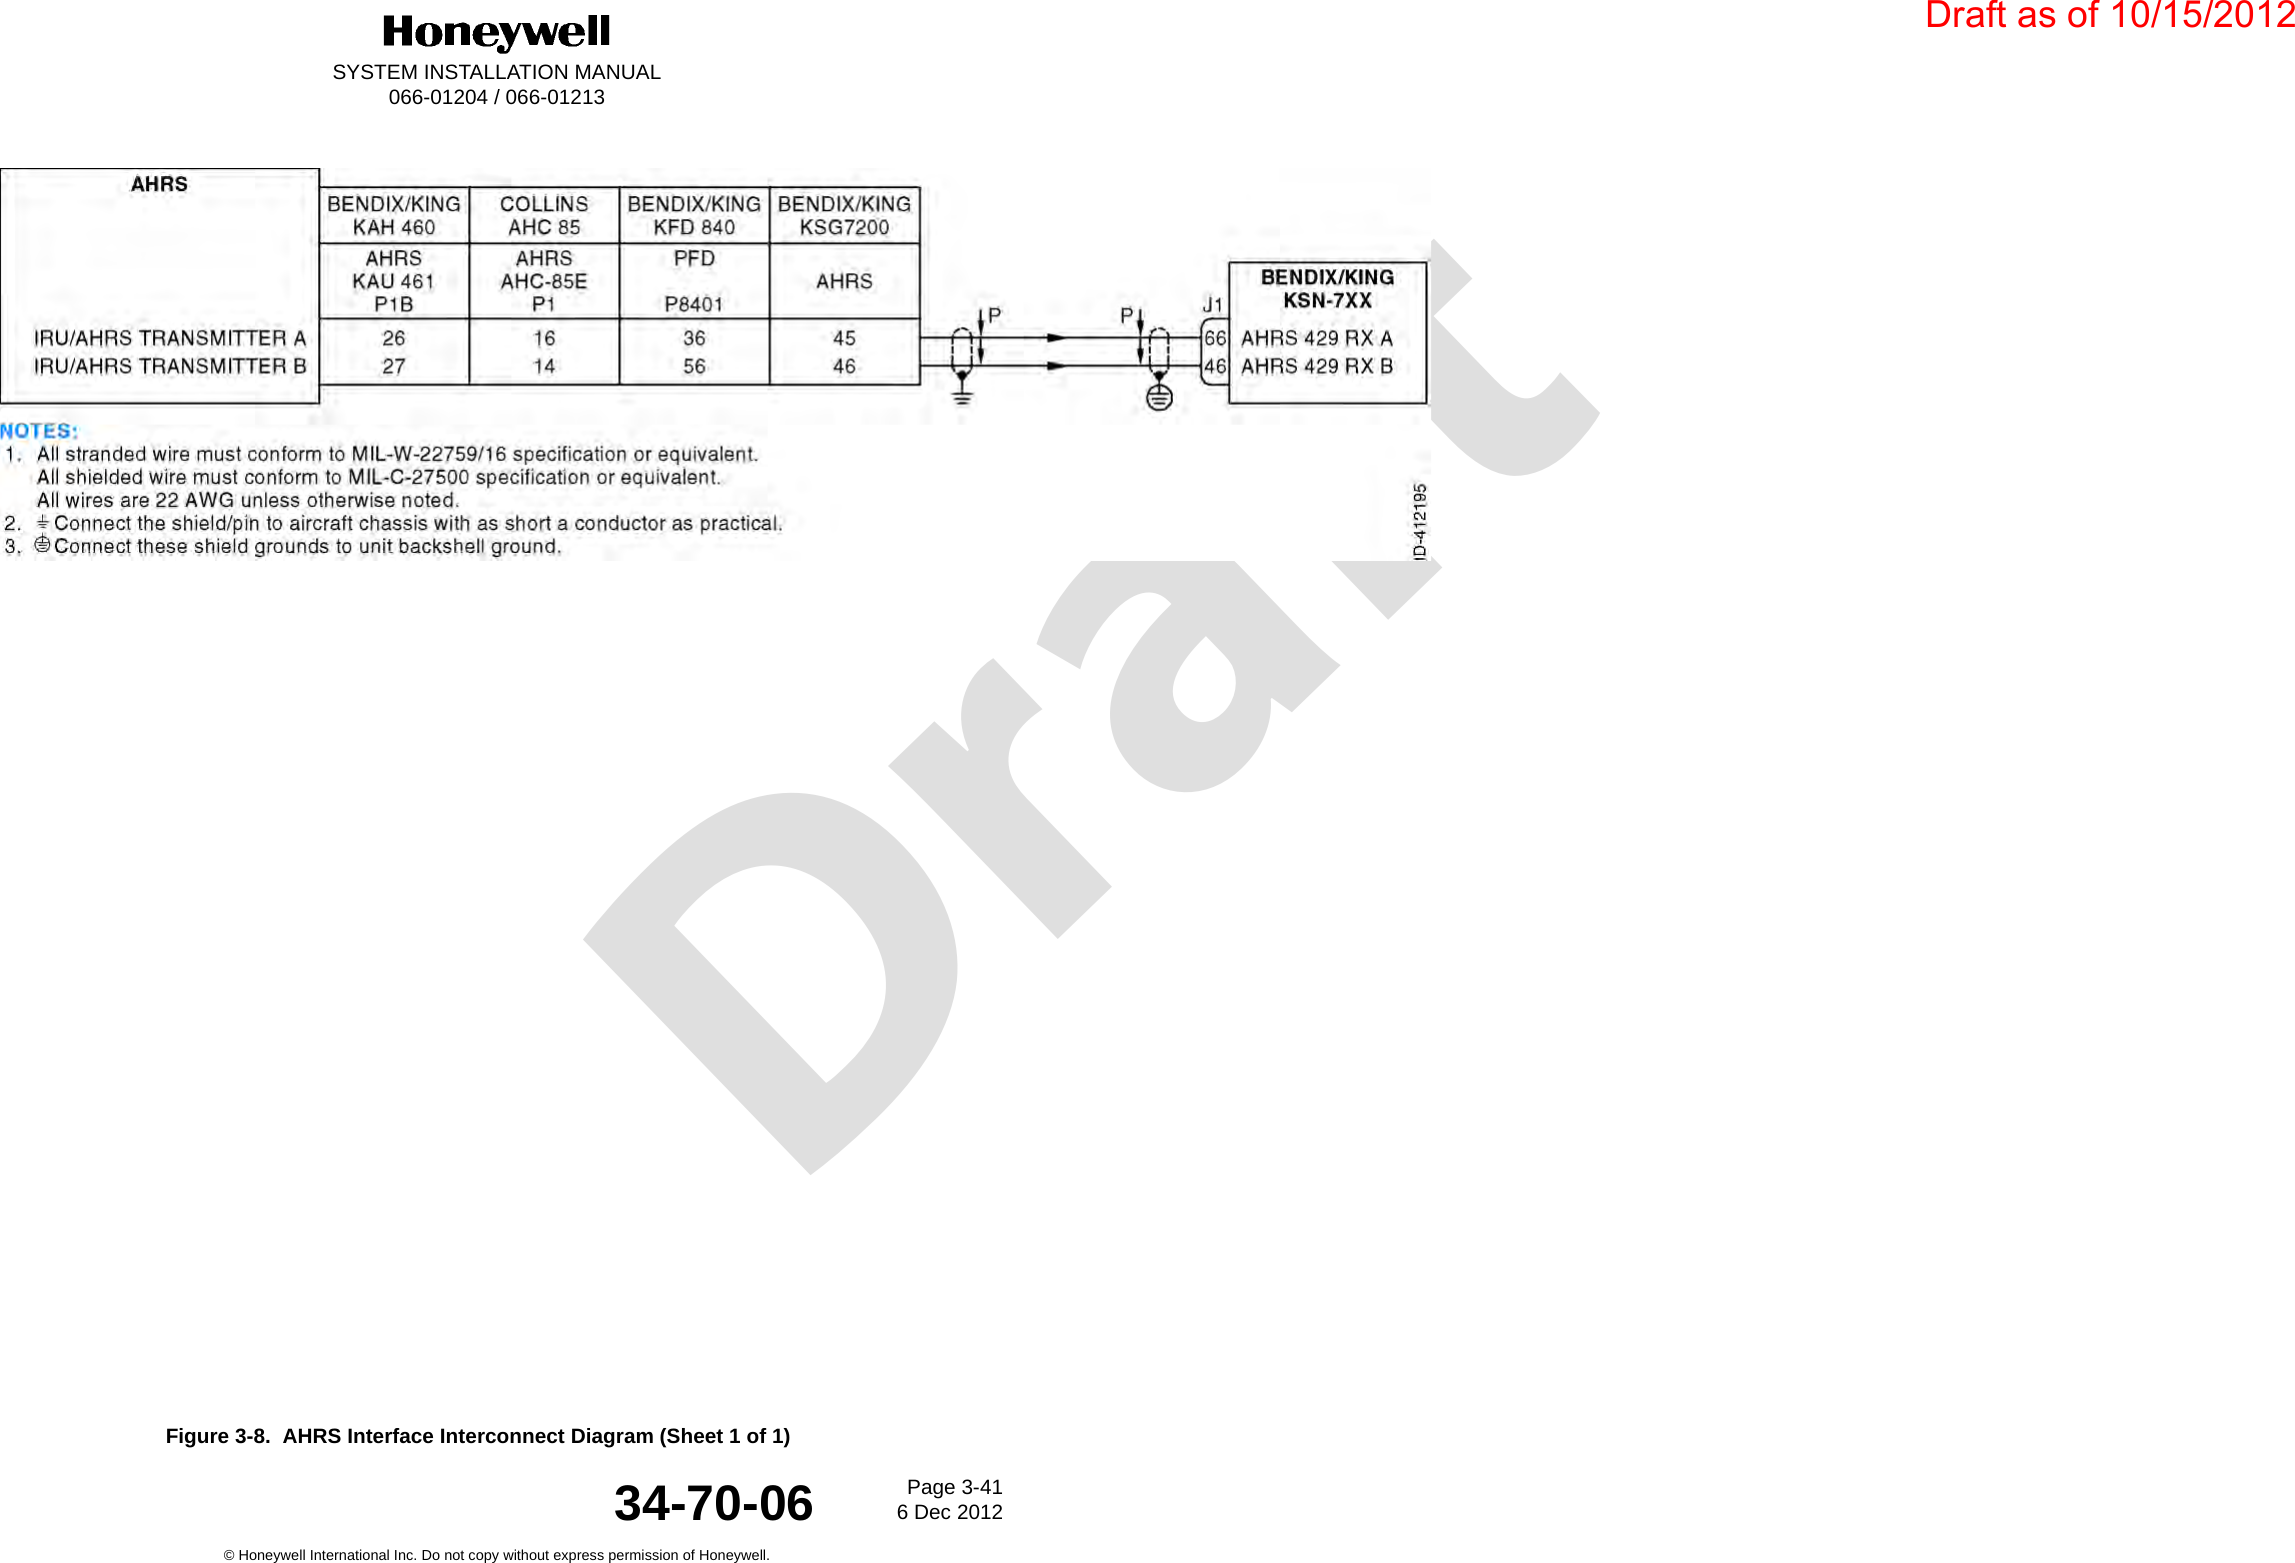 DraftSYSTEM INSTALLATION MANUAL066-01204 / 066-01213Page 3-416 Dec 2012© Honeywell International Inc. Do not copy without express permission of Honeywell.34-70-06Figure 3-8.  AHRS Interface Interconnect Diagram (Sheet 1 of 1)Draft as of 10/15/2012